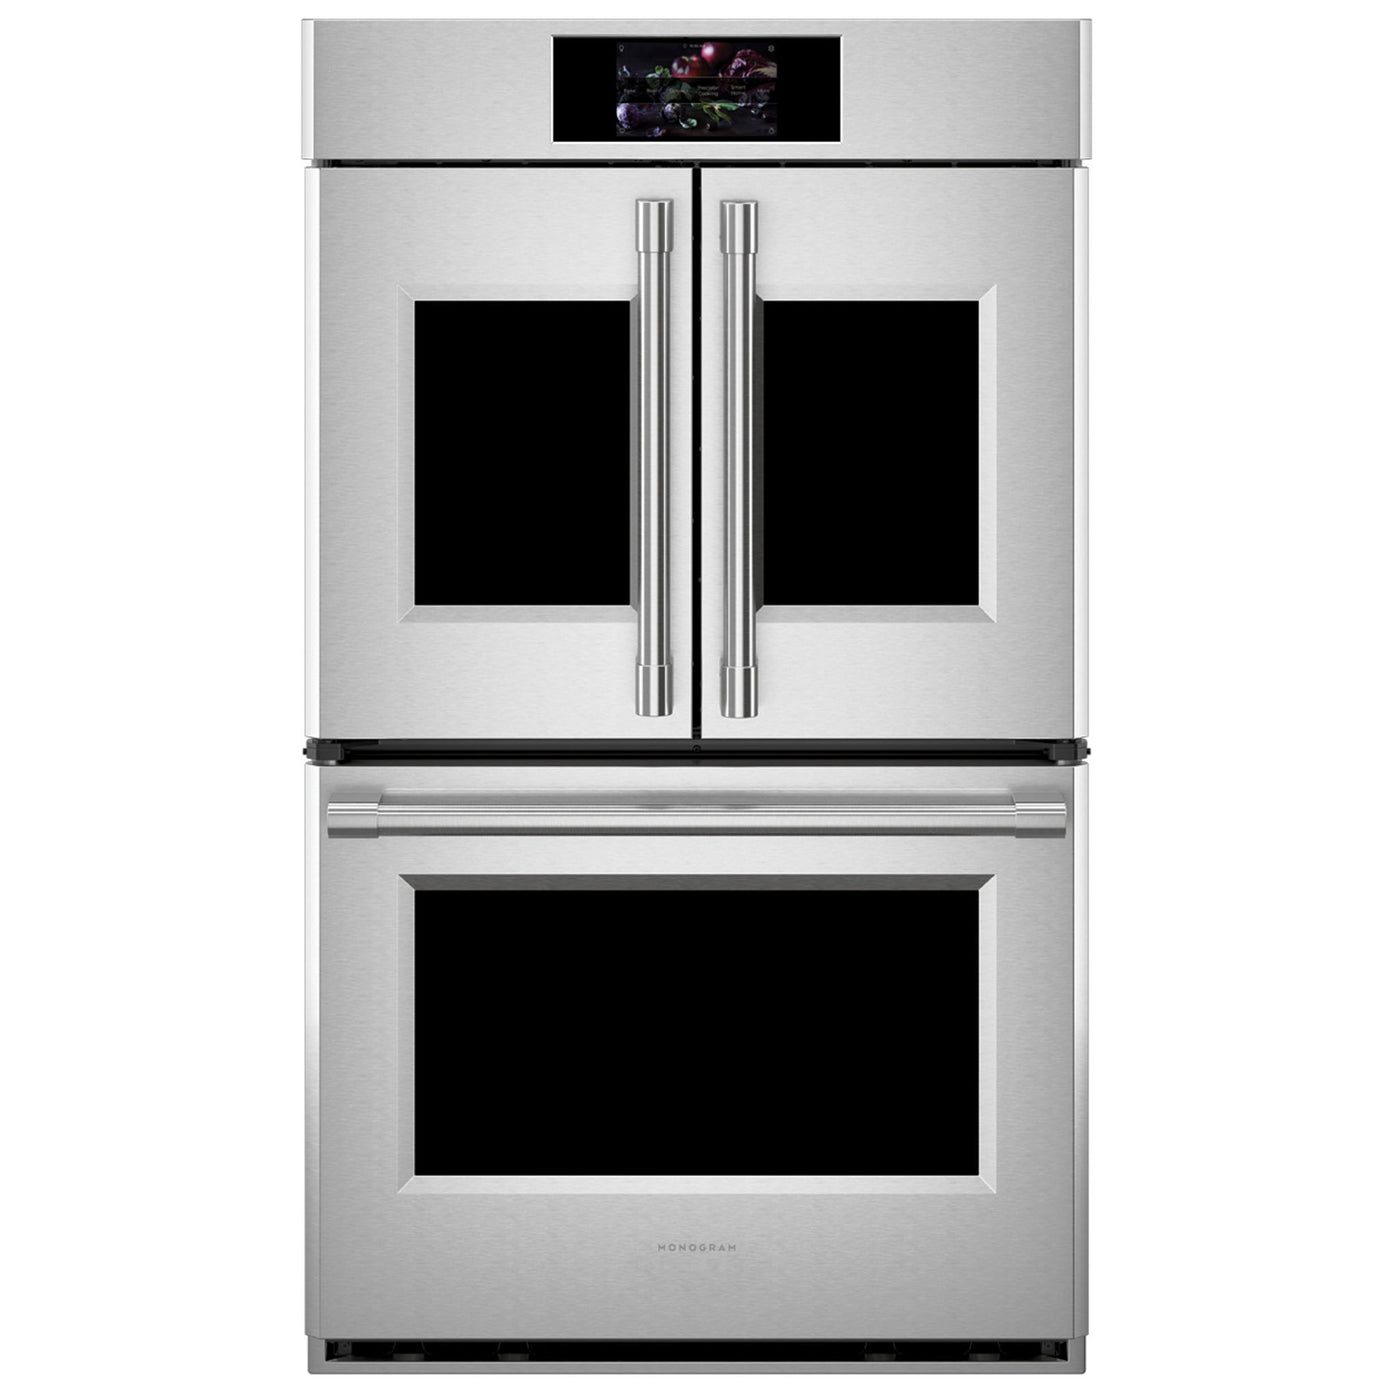 30" Monogram French-Door Electric Convection Double Wall Oven Statement Collection